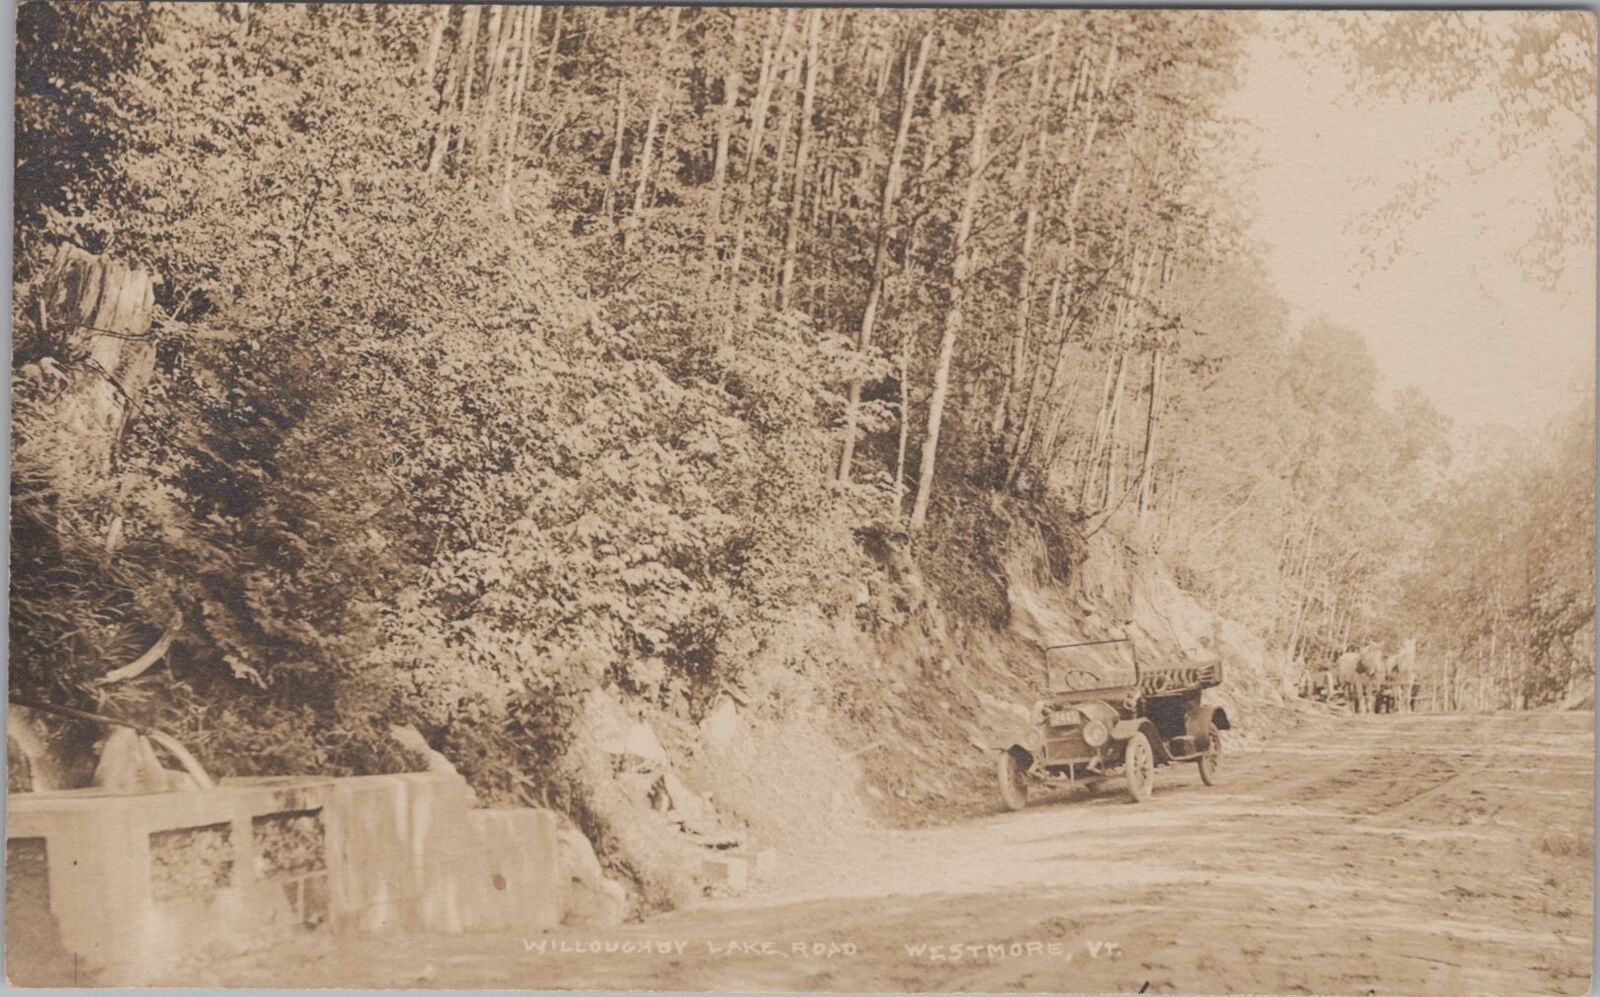 Old Car Horse Cart on Willoughby Lake Road Westmore Vermont RPPC 1917Postcard